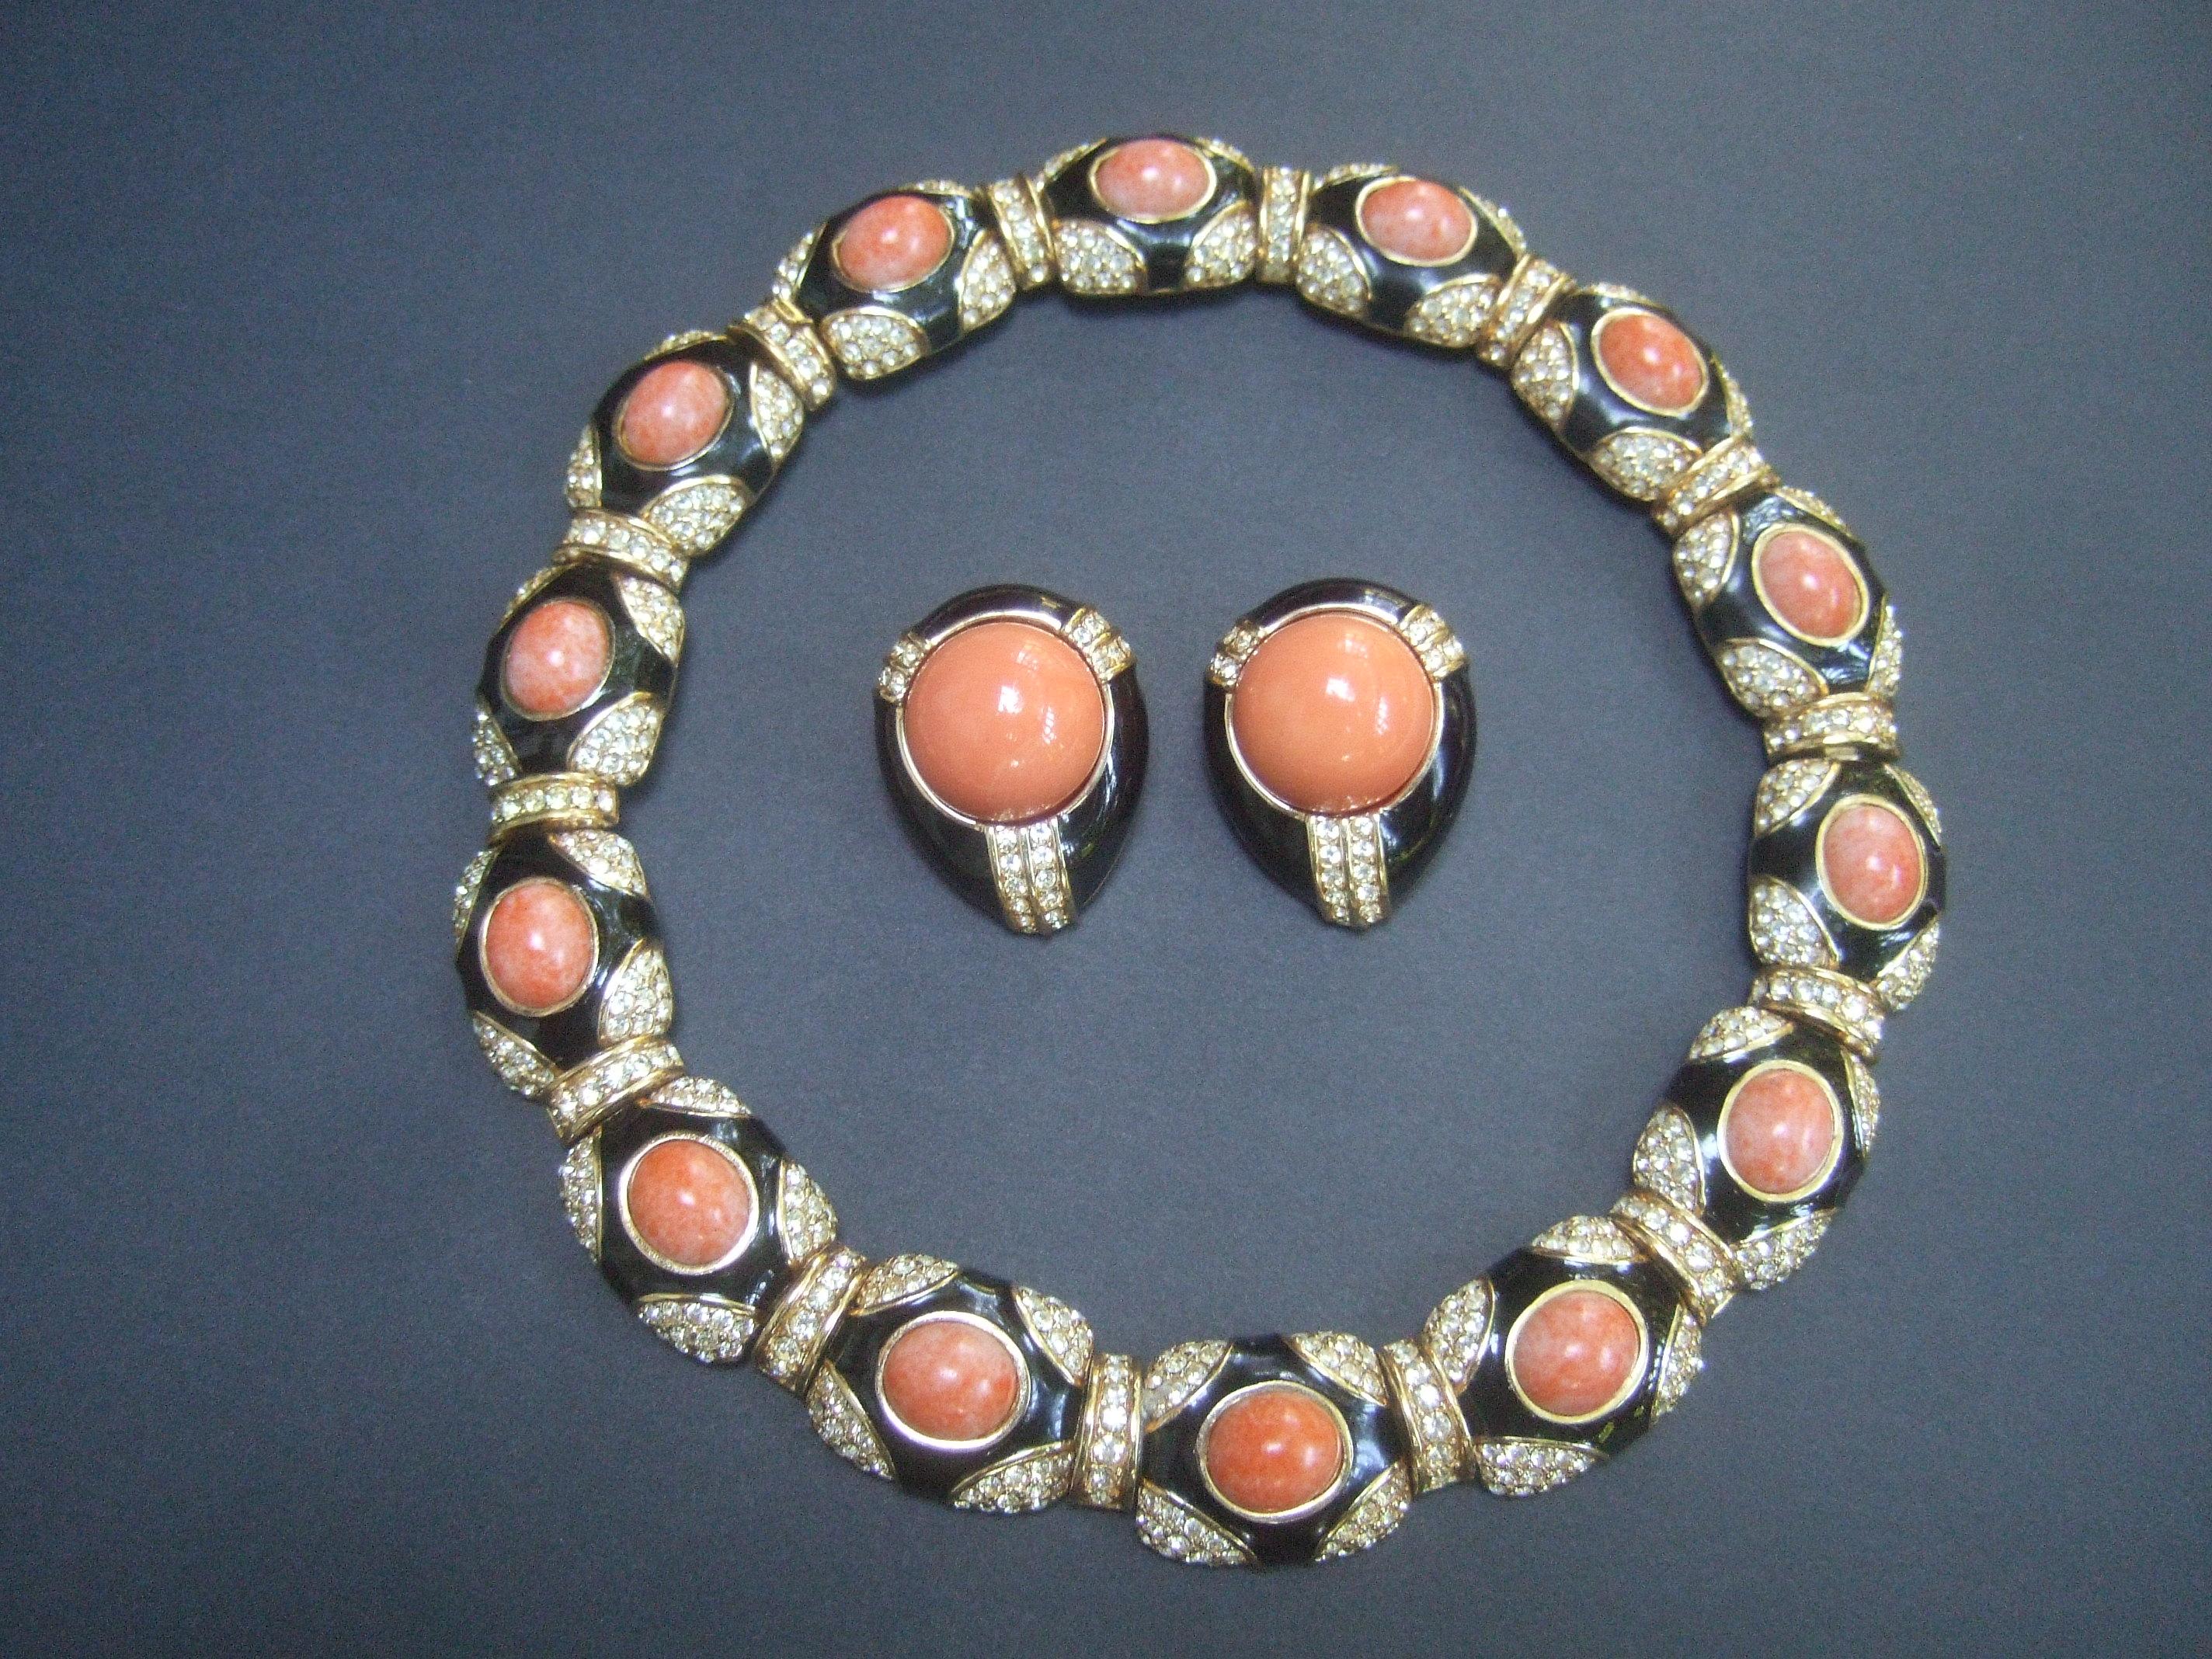 Ciner exquisite coral resin jeweled choker & earring ensemble c 1980s
The elegant choker necklace & clip-on earrings are embellished
with faux coral resin cabochons, black enamel lacquer with pave 
crystals set in gilt metal 

The articulated hinged